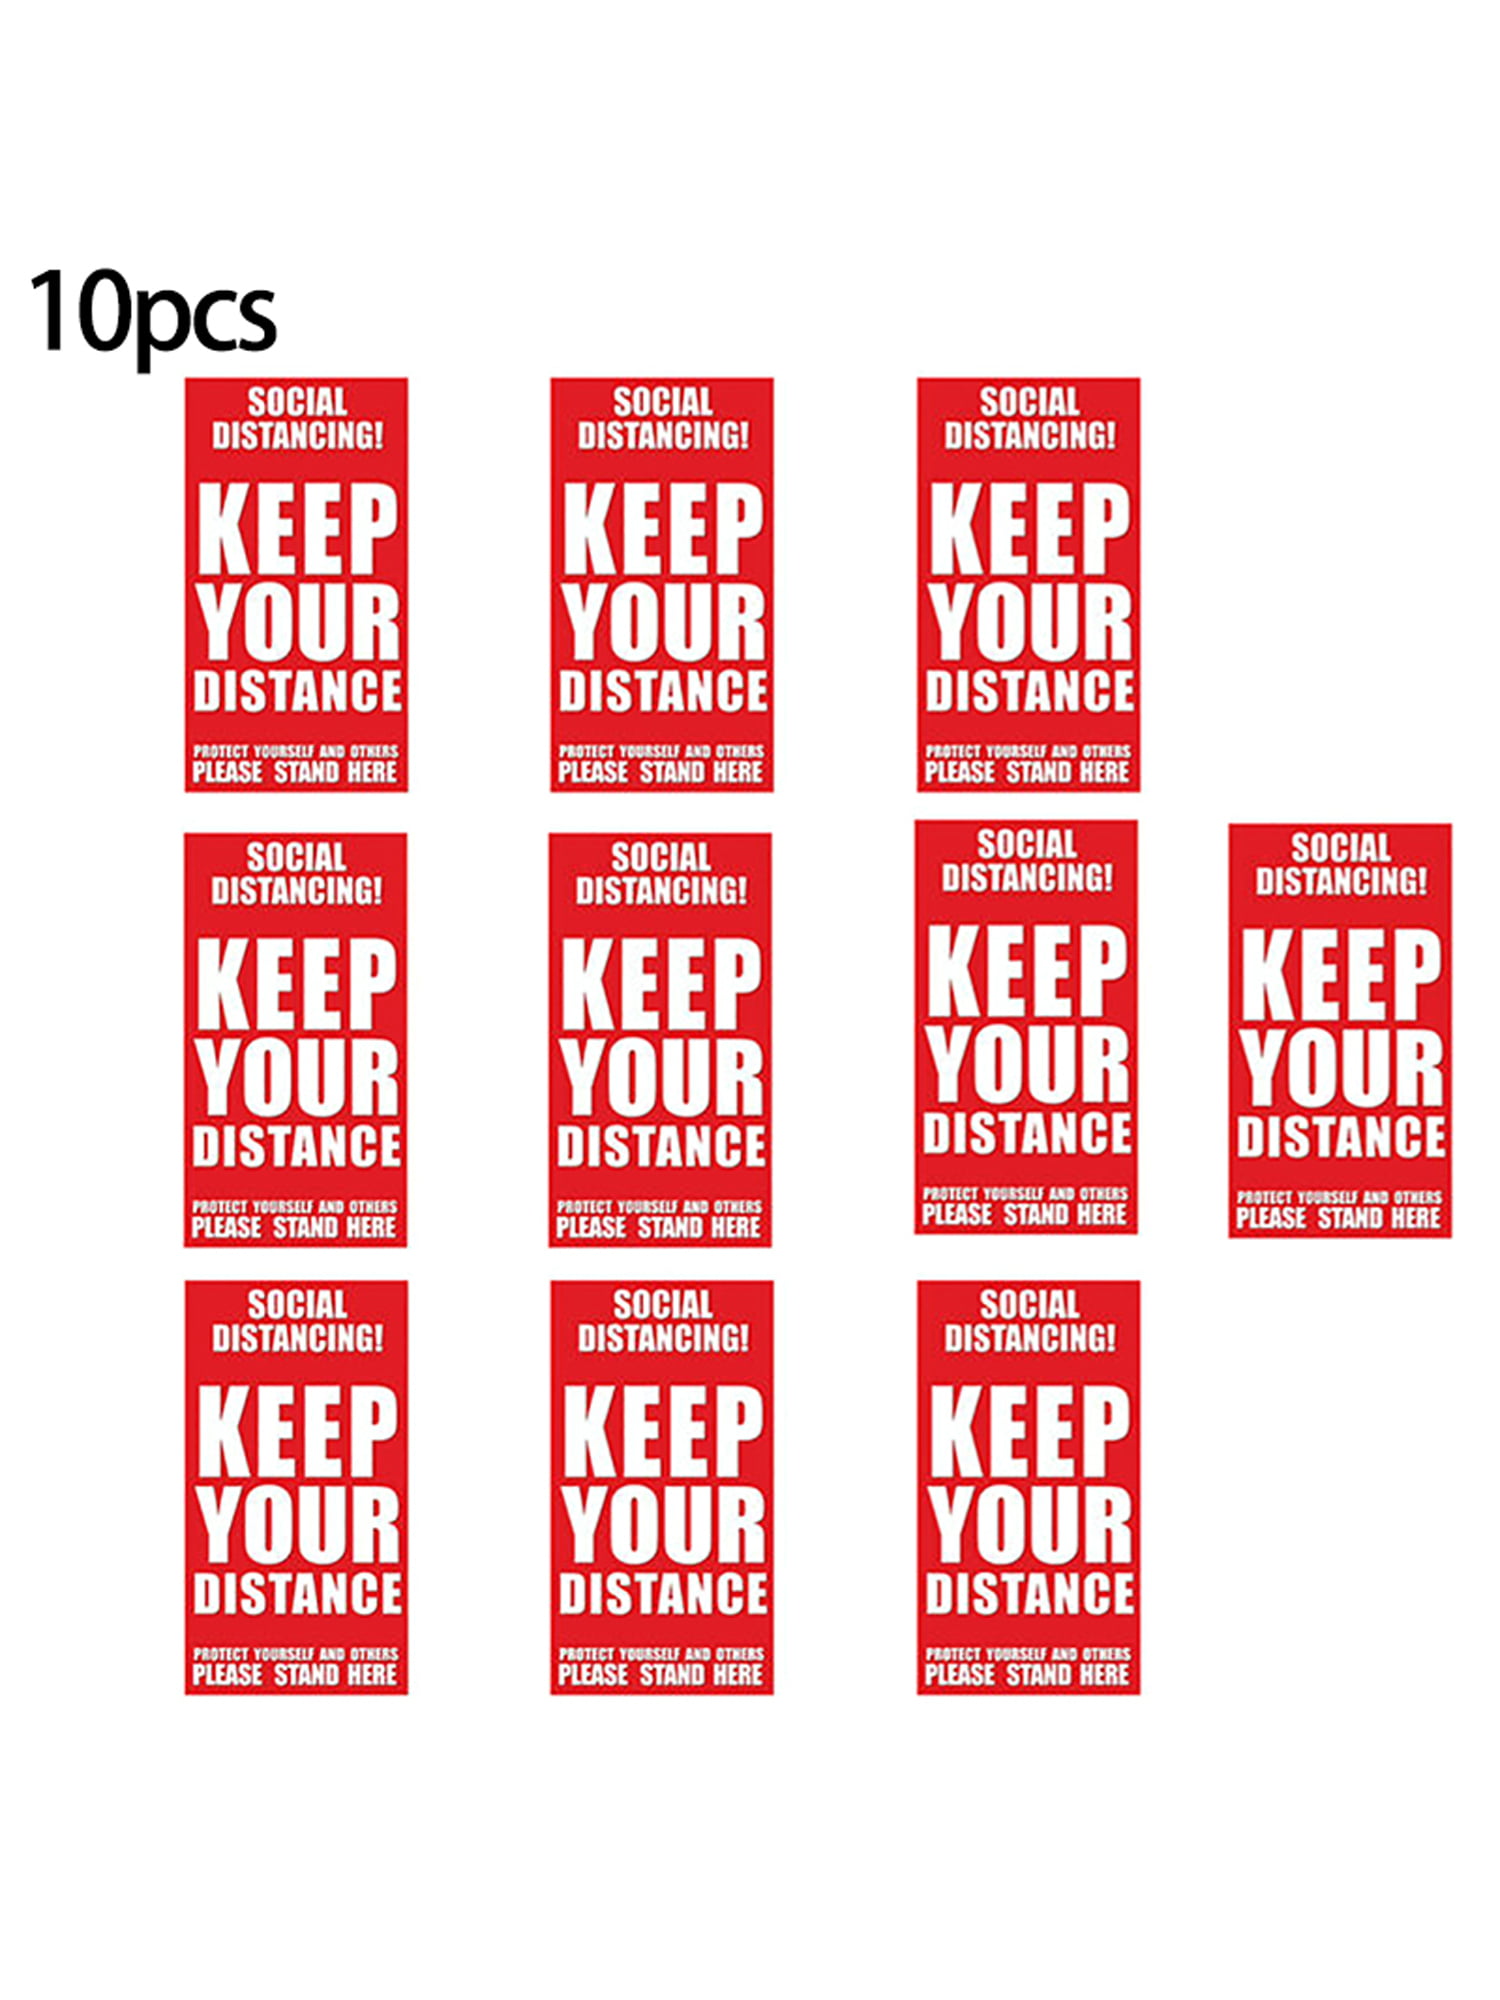 Keep your distance Shop Office Social Distancing Floor Stickers self adhesive 